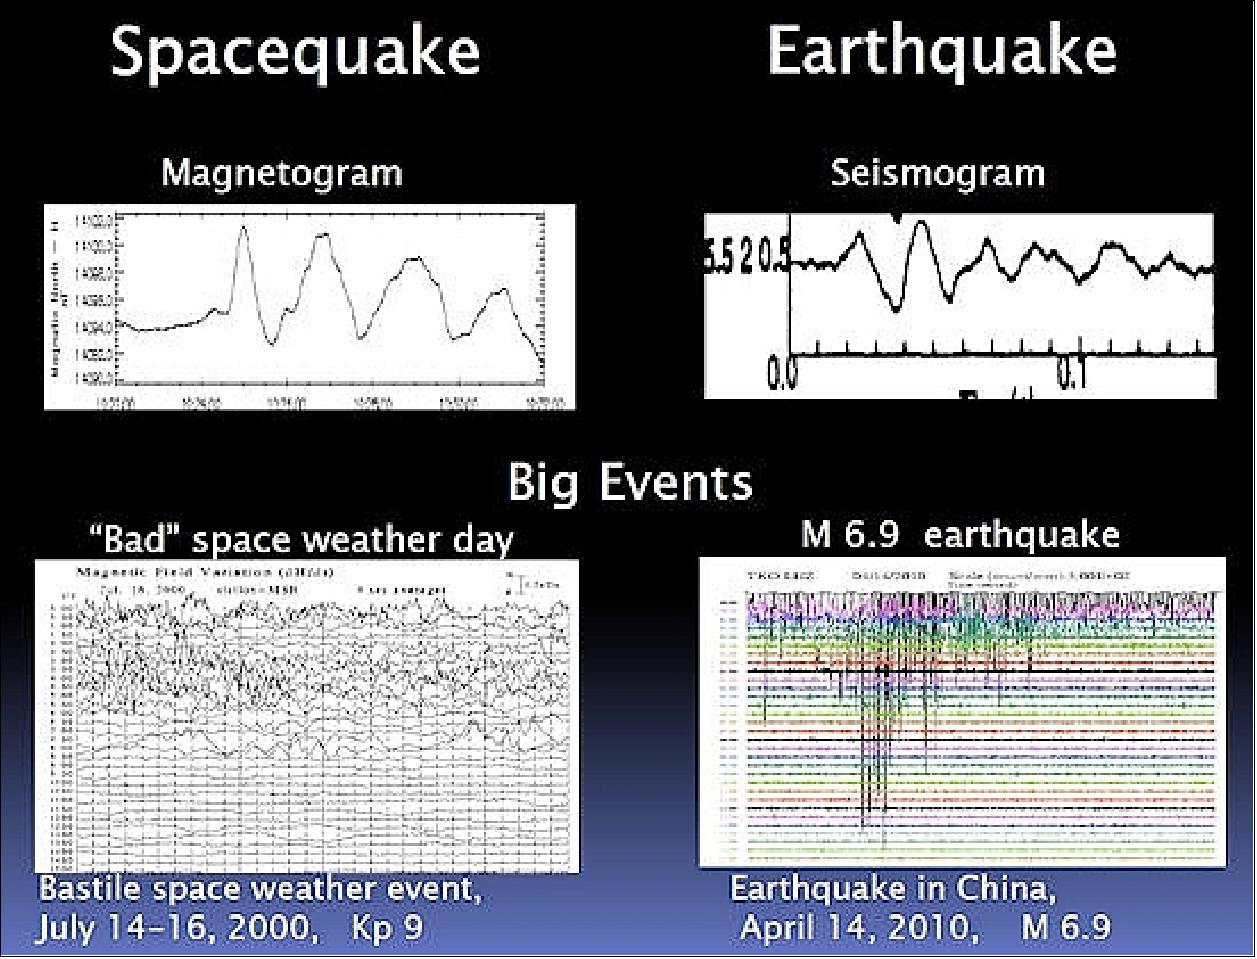 Figure 46: During a spacequake, Earth's magnetic field shakes in a way that is analogous to the shaking of the ground during an earthquake (image credit: Space Research Institute of Austria)